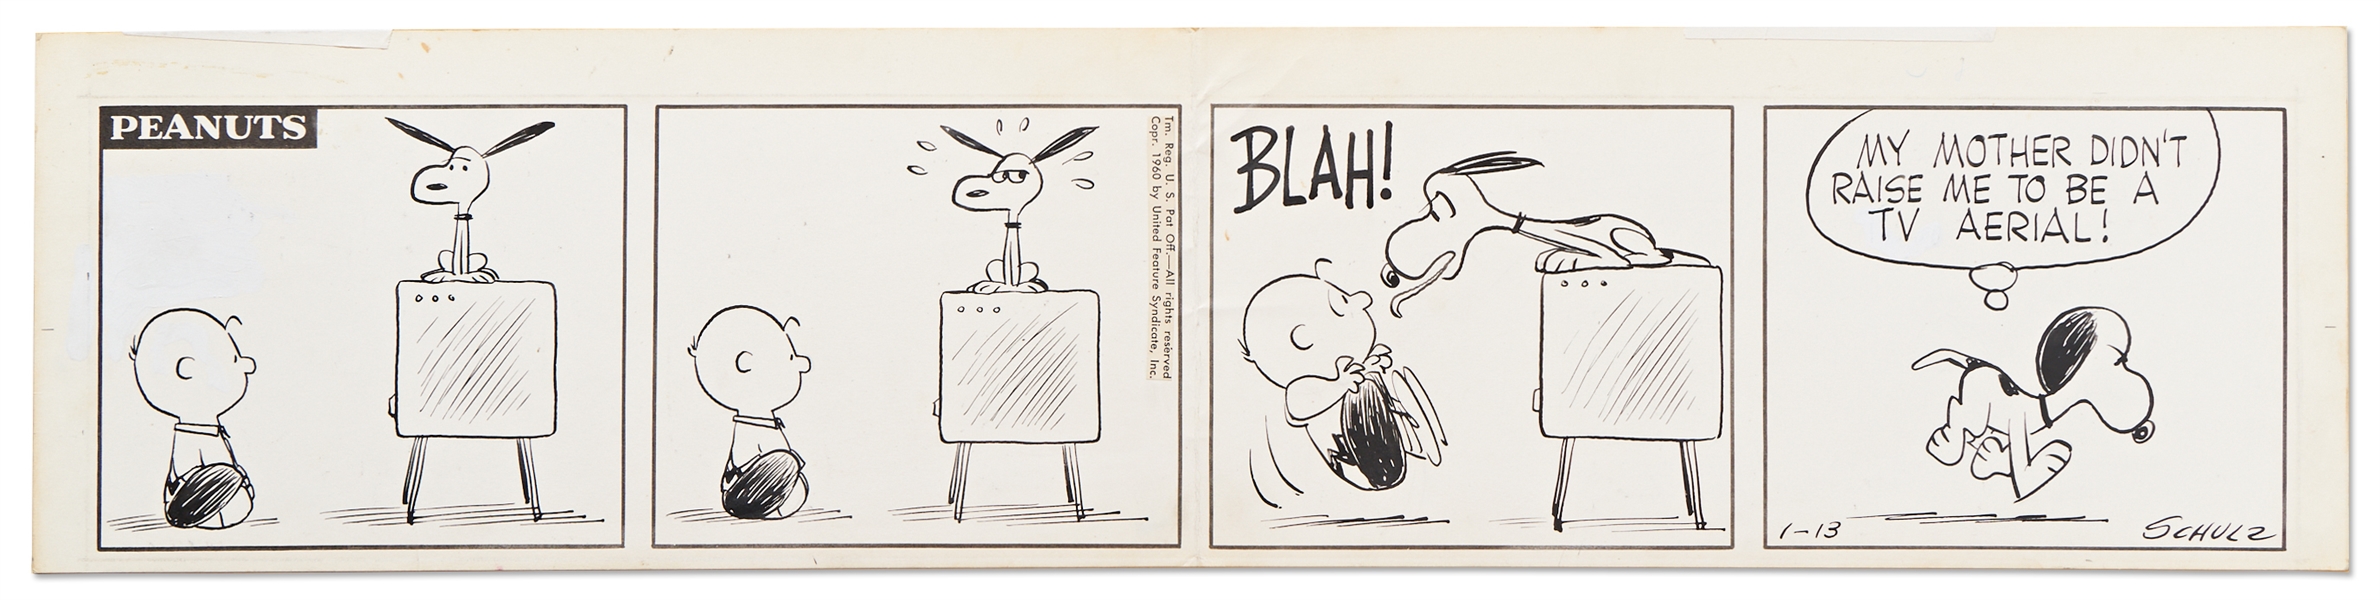 Charles Schulz Original Hand-Drawn ''Peanuts'' Comic Strip from 1960 Where Snoopy Walks on Four Legs -- Snoopy Resents His Ears Being Used as TV Antennae